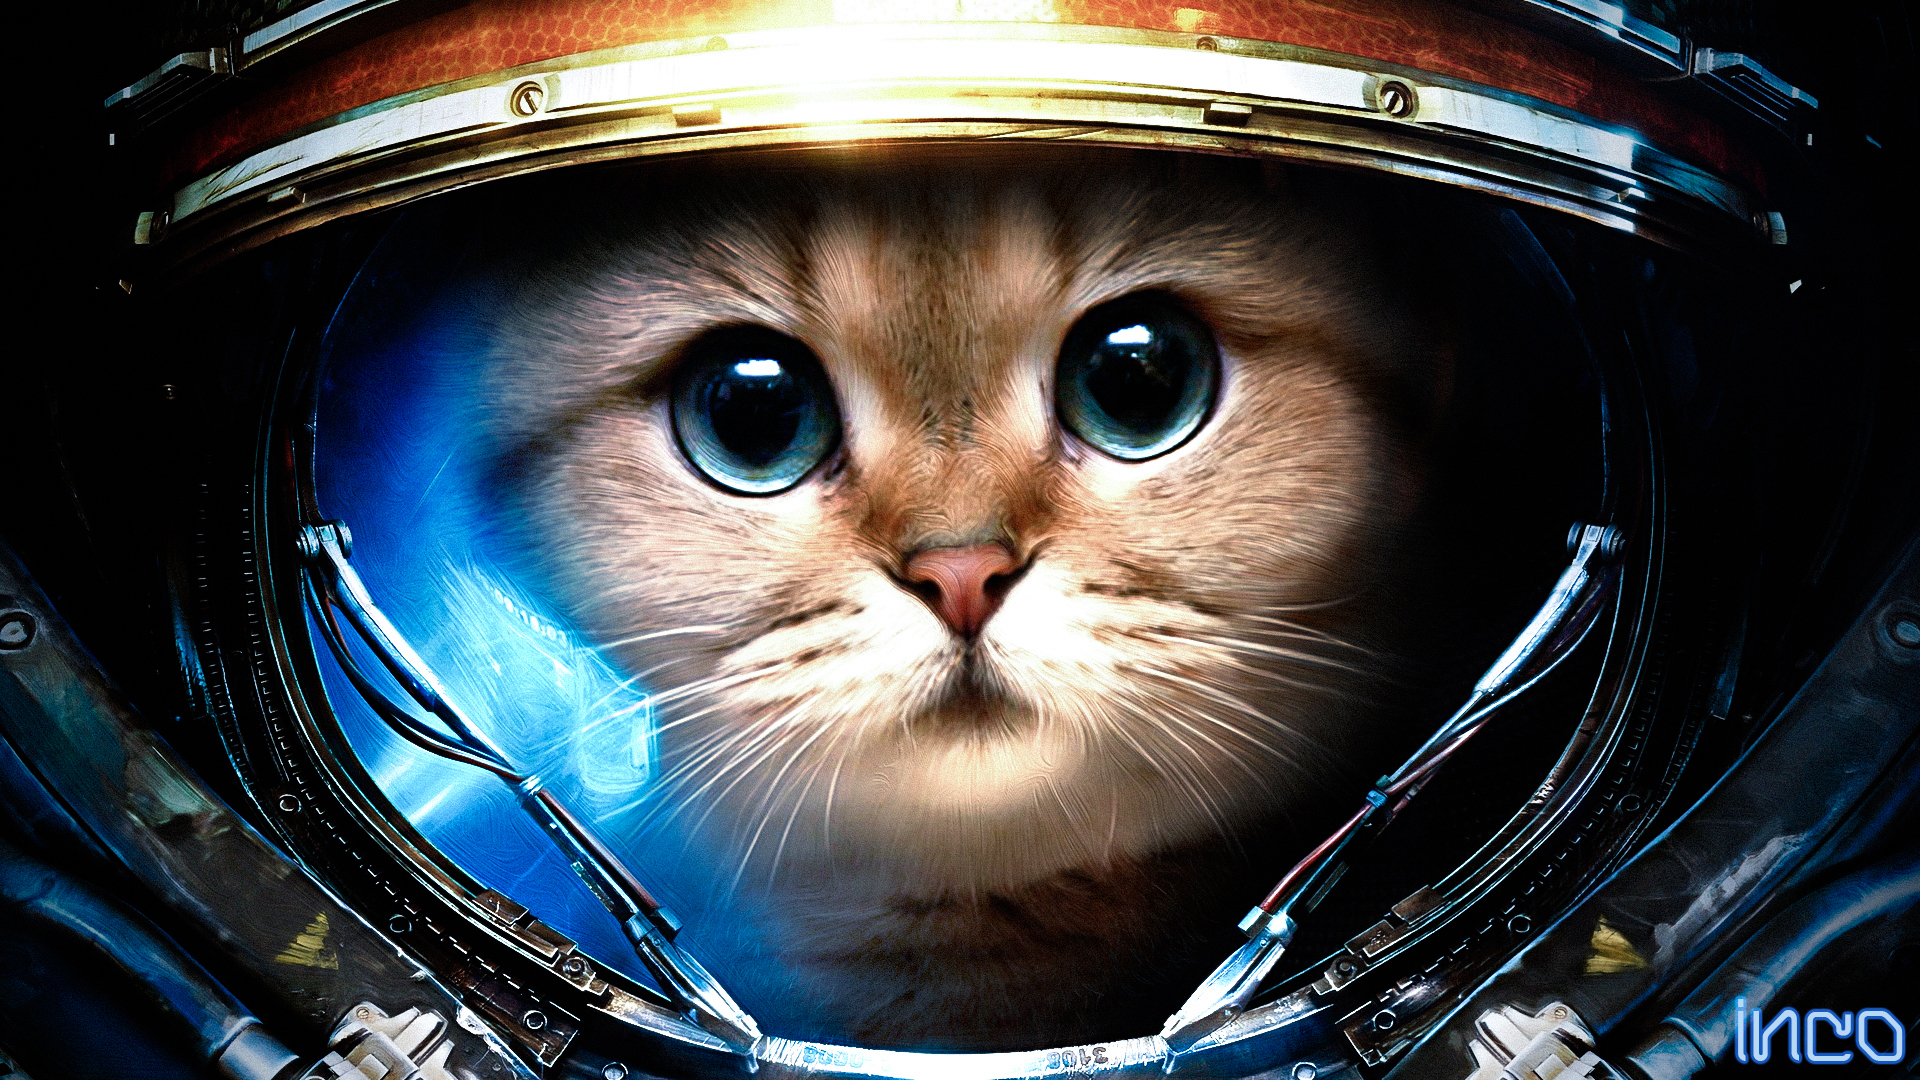 Starcraft Sci Fi Science Fiction Humor Funny Astronaut Animals Cats